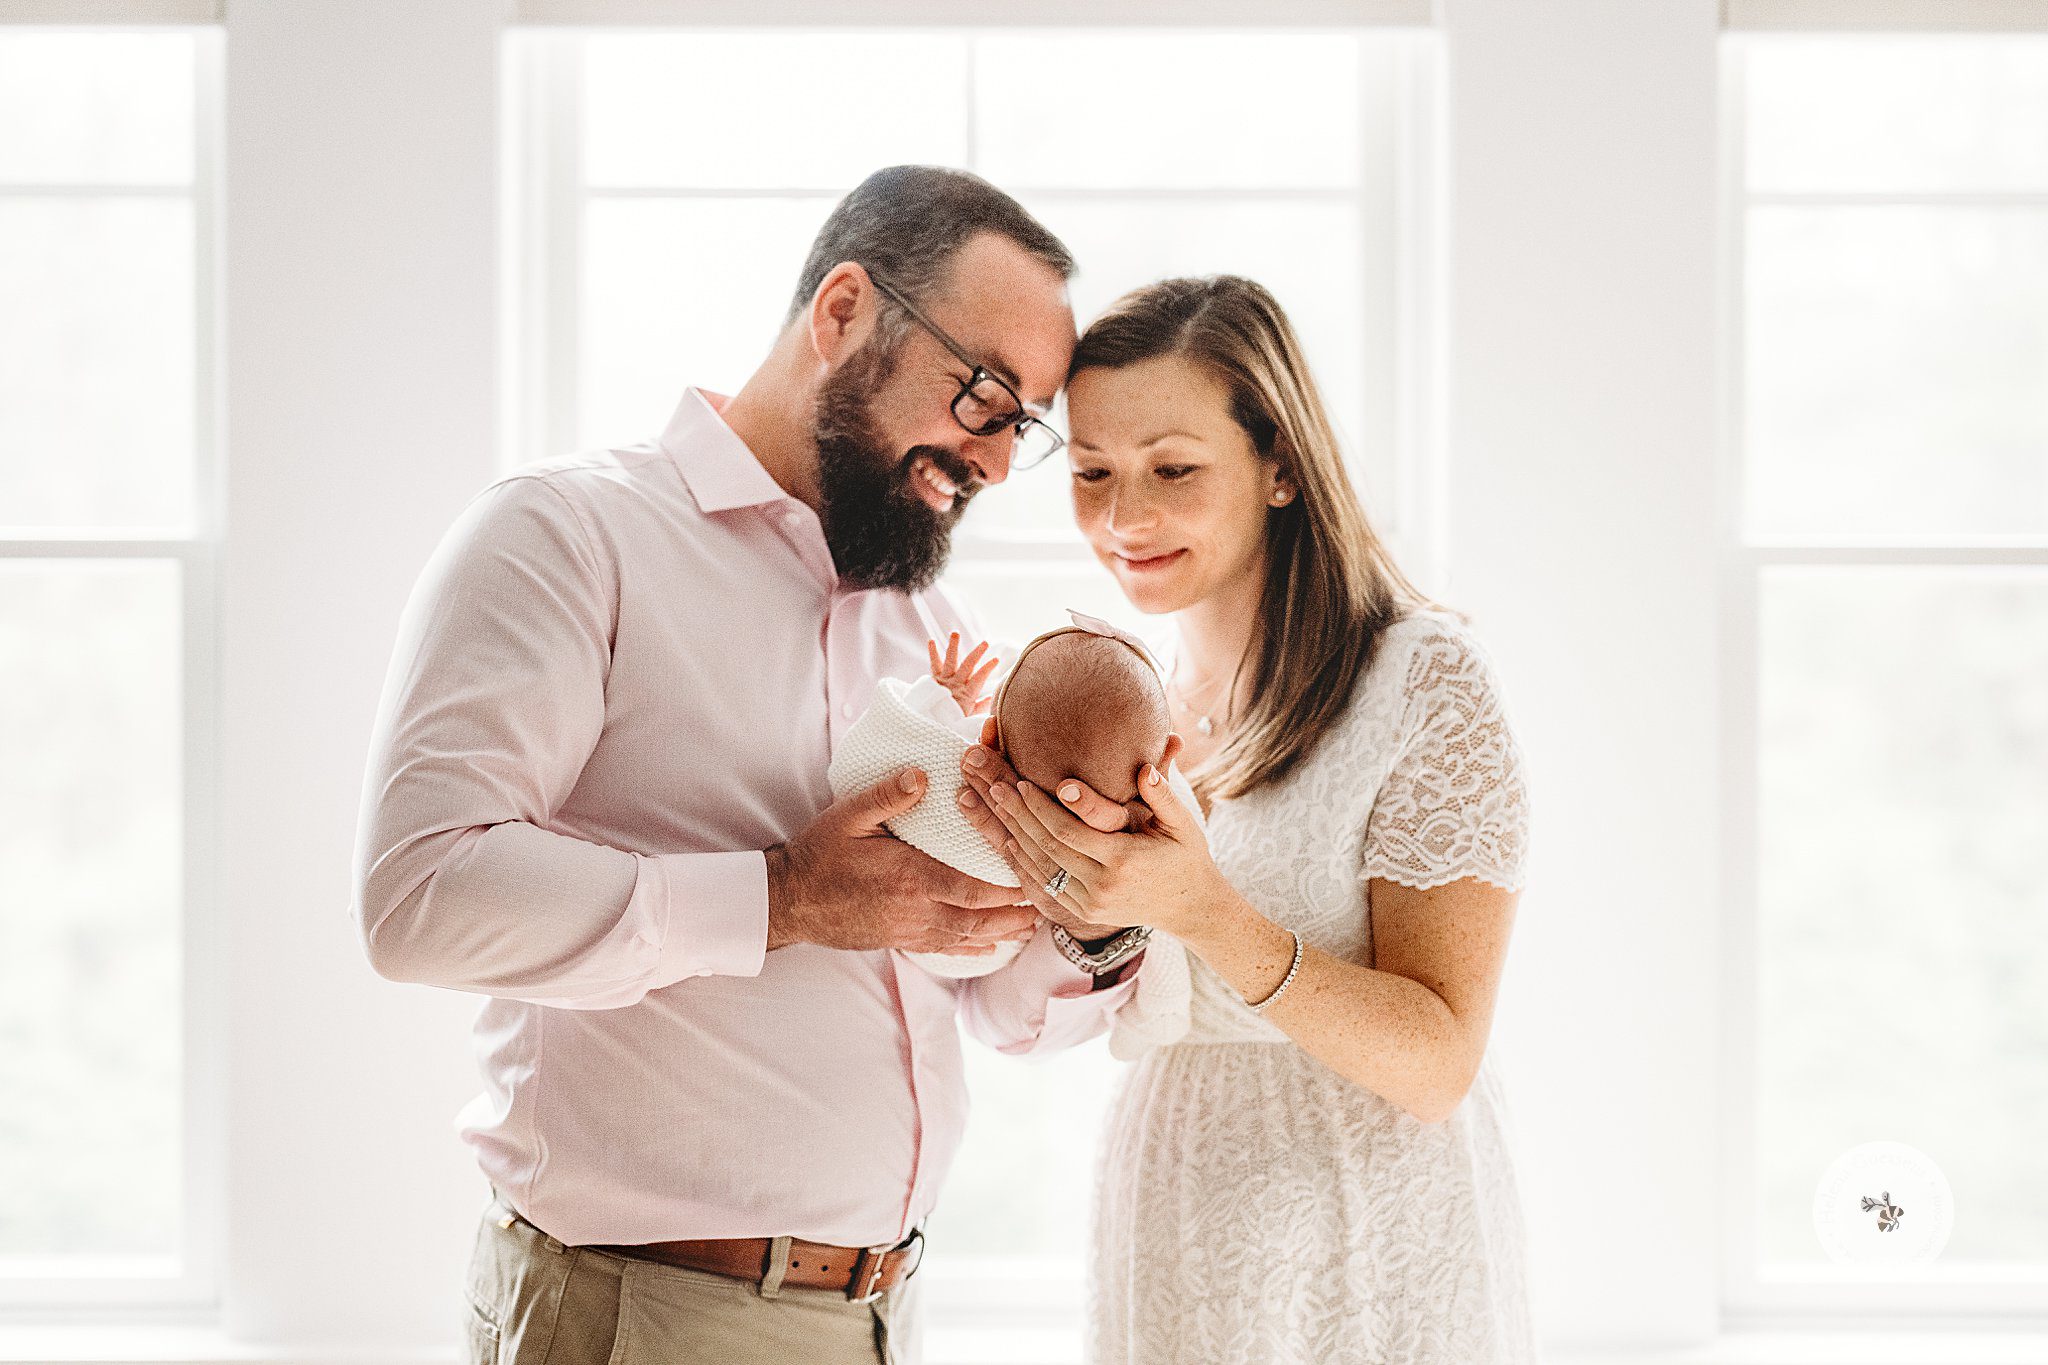 paneers stand together with daughter in front of window during Dover MA Lifestyle Newborn Session